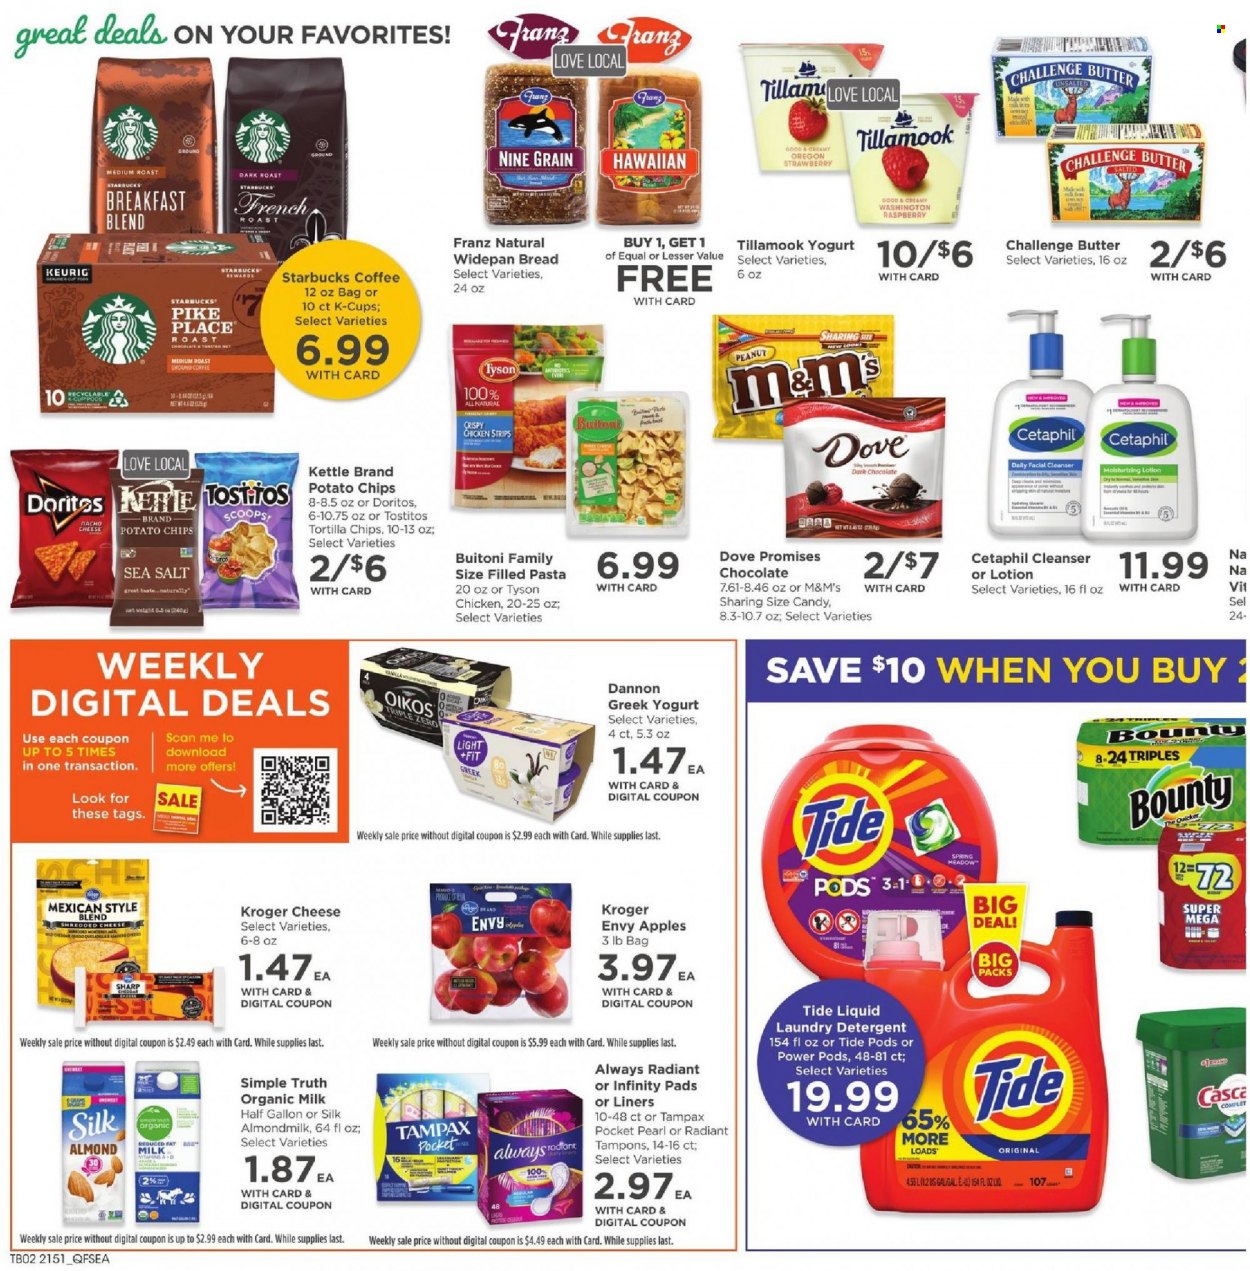 thumbnail - QFC Flyer - 01/19/2022 - 01/25/2022 - Sales products - bread, apples, pasta, Buitoni, filled pasta, shredded cheese, greek yoghurt, yoghurt, Oikos, Dannon, almond milk, organic milk, Silk, butter, strips, chocolate, Bounty, M&M's, dark chocolate, Doritos, tortilla chips, potato chips, chips, Tostitos, coffee, Starbucks, coffee capsules, K-Cups, Keurig, breakfast blend, detergent, Tide, laundry detergent, Dove, Tampax, sanitary pads, tampons, cleanser, Infinity, body lotion, Sharp. Page 3.